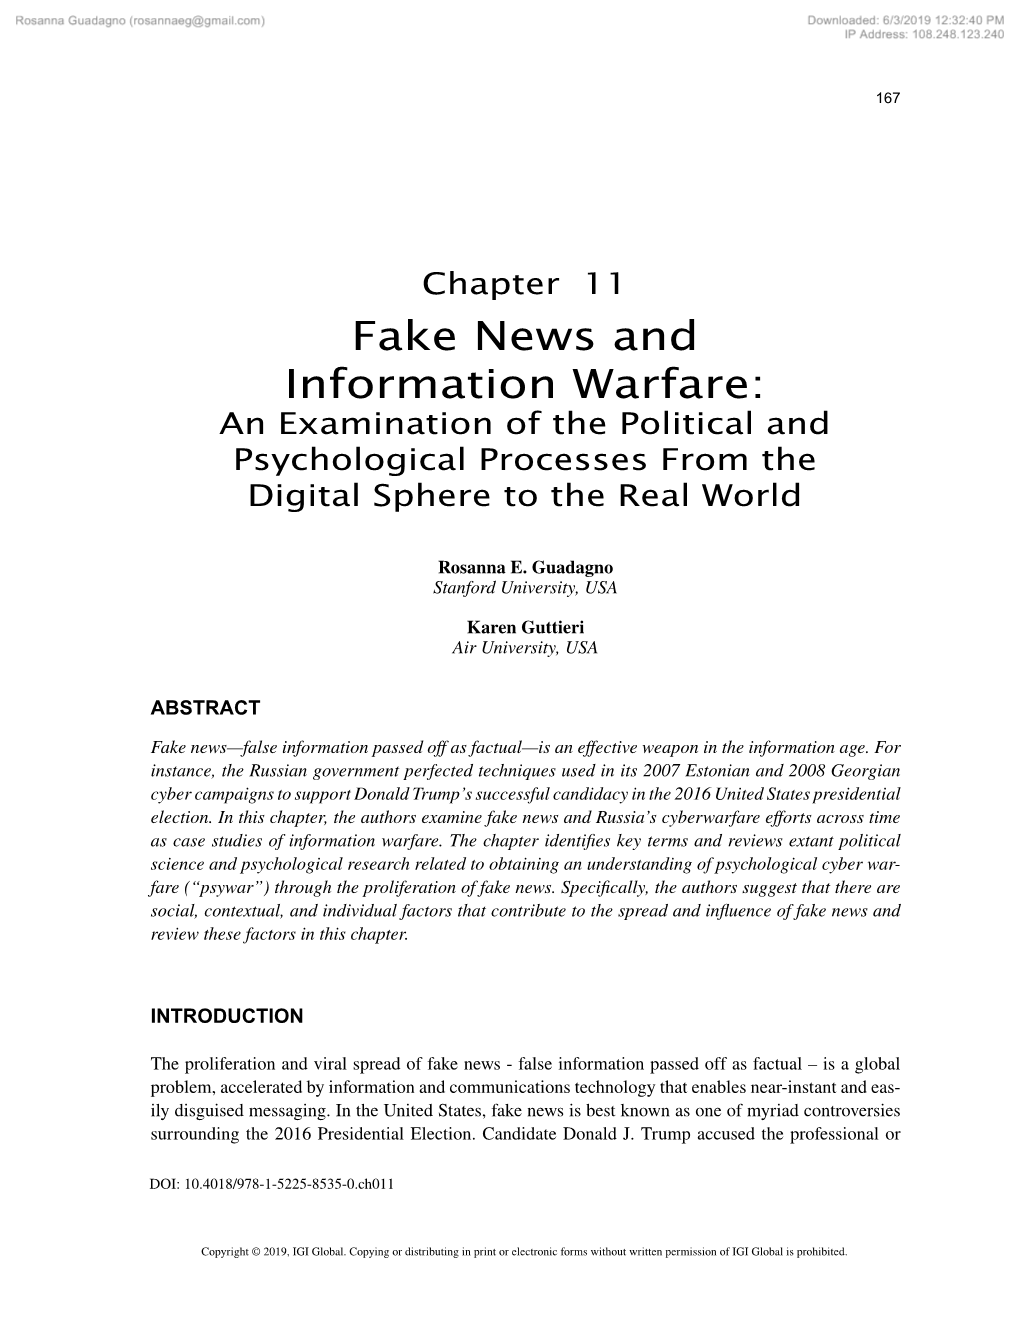 Chapter 11 Fake News and Information Warfare: an Examination of the Political and Psychological Processes from the Digital Sphere to the Real World